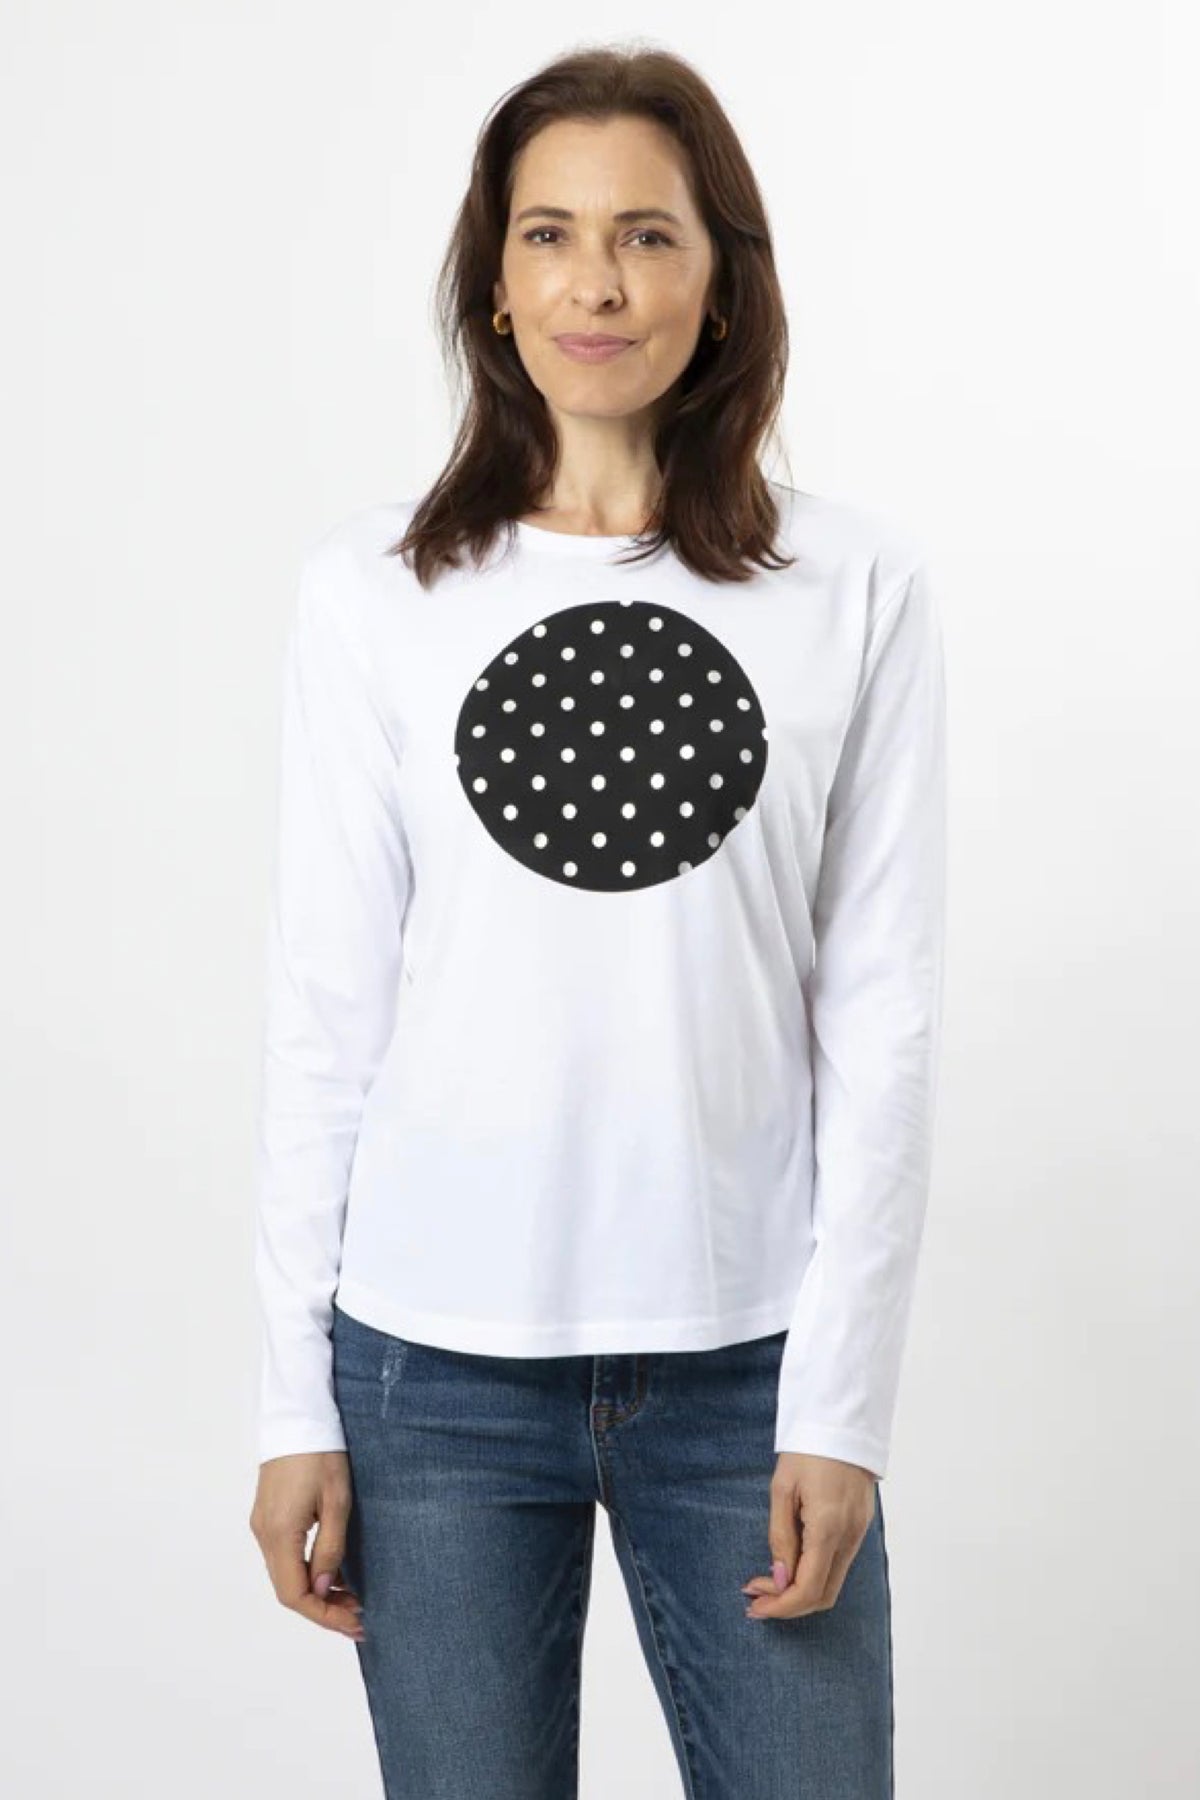 LS Tee White Black Pearl Spot - PREORDER DELIVERY EARLY APRIL